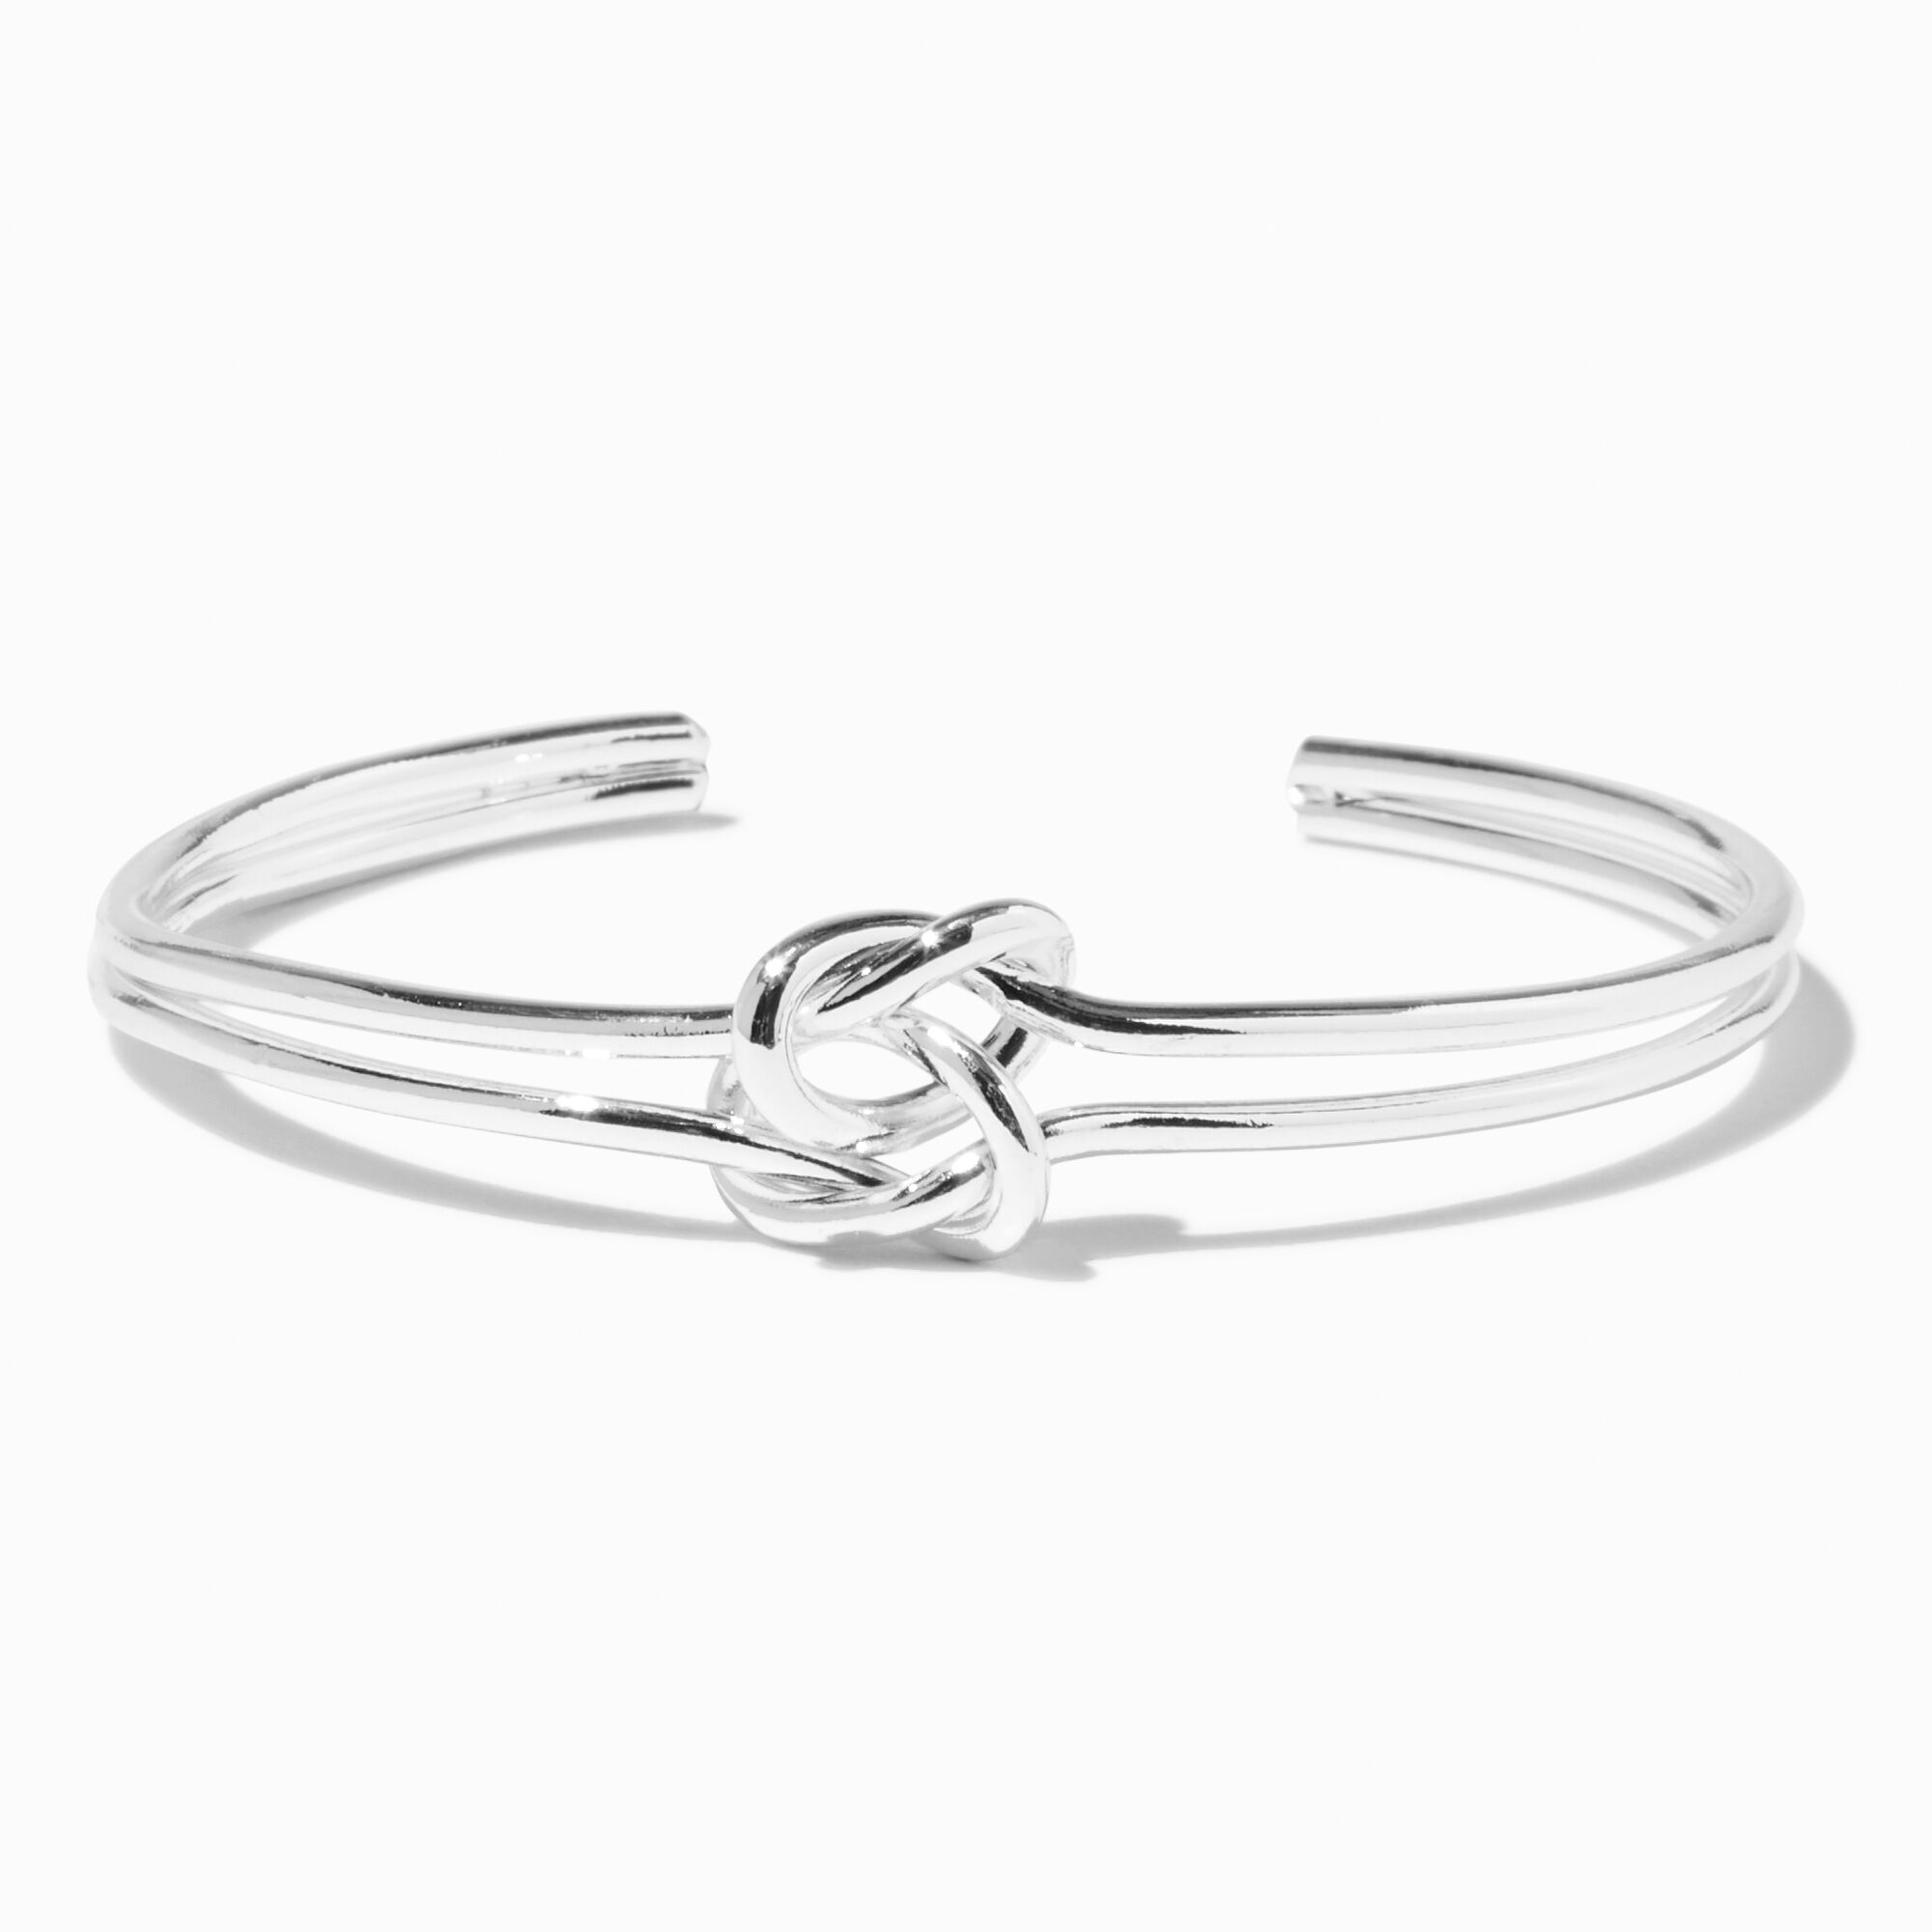 View Claires Tone Double Knot Cuff Bracelet Silver information